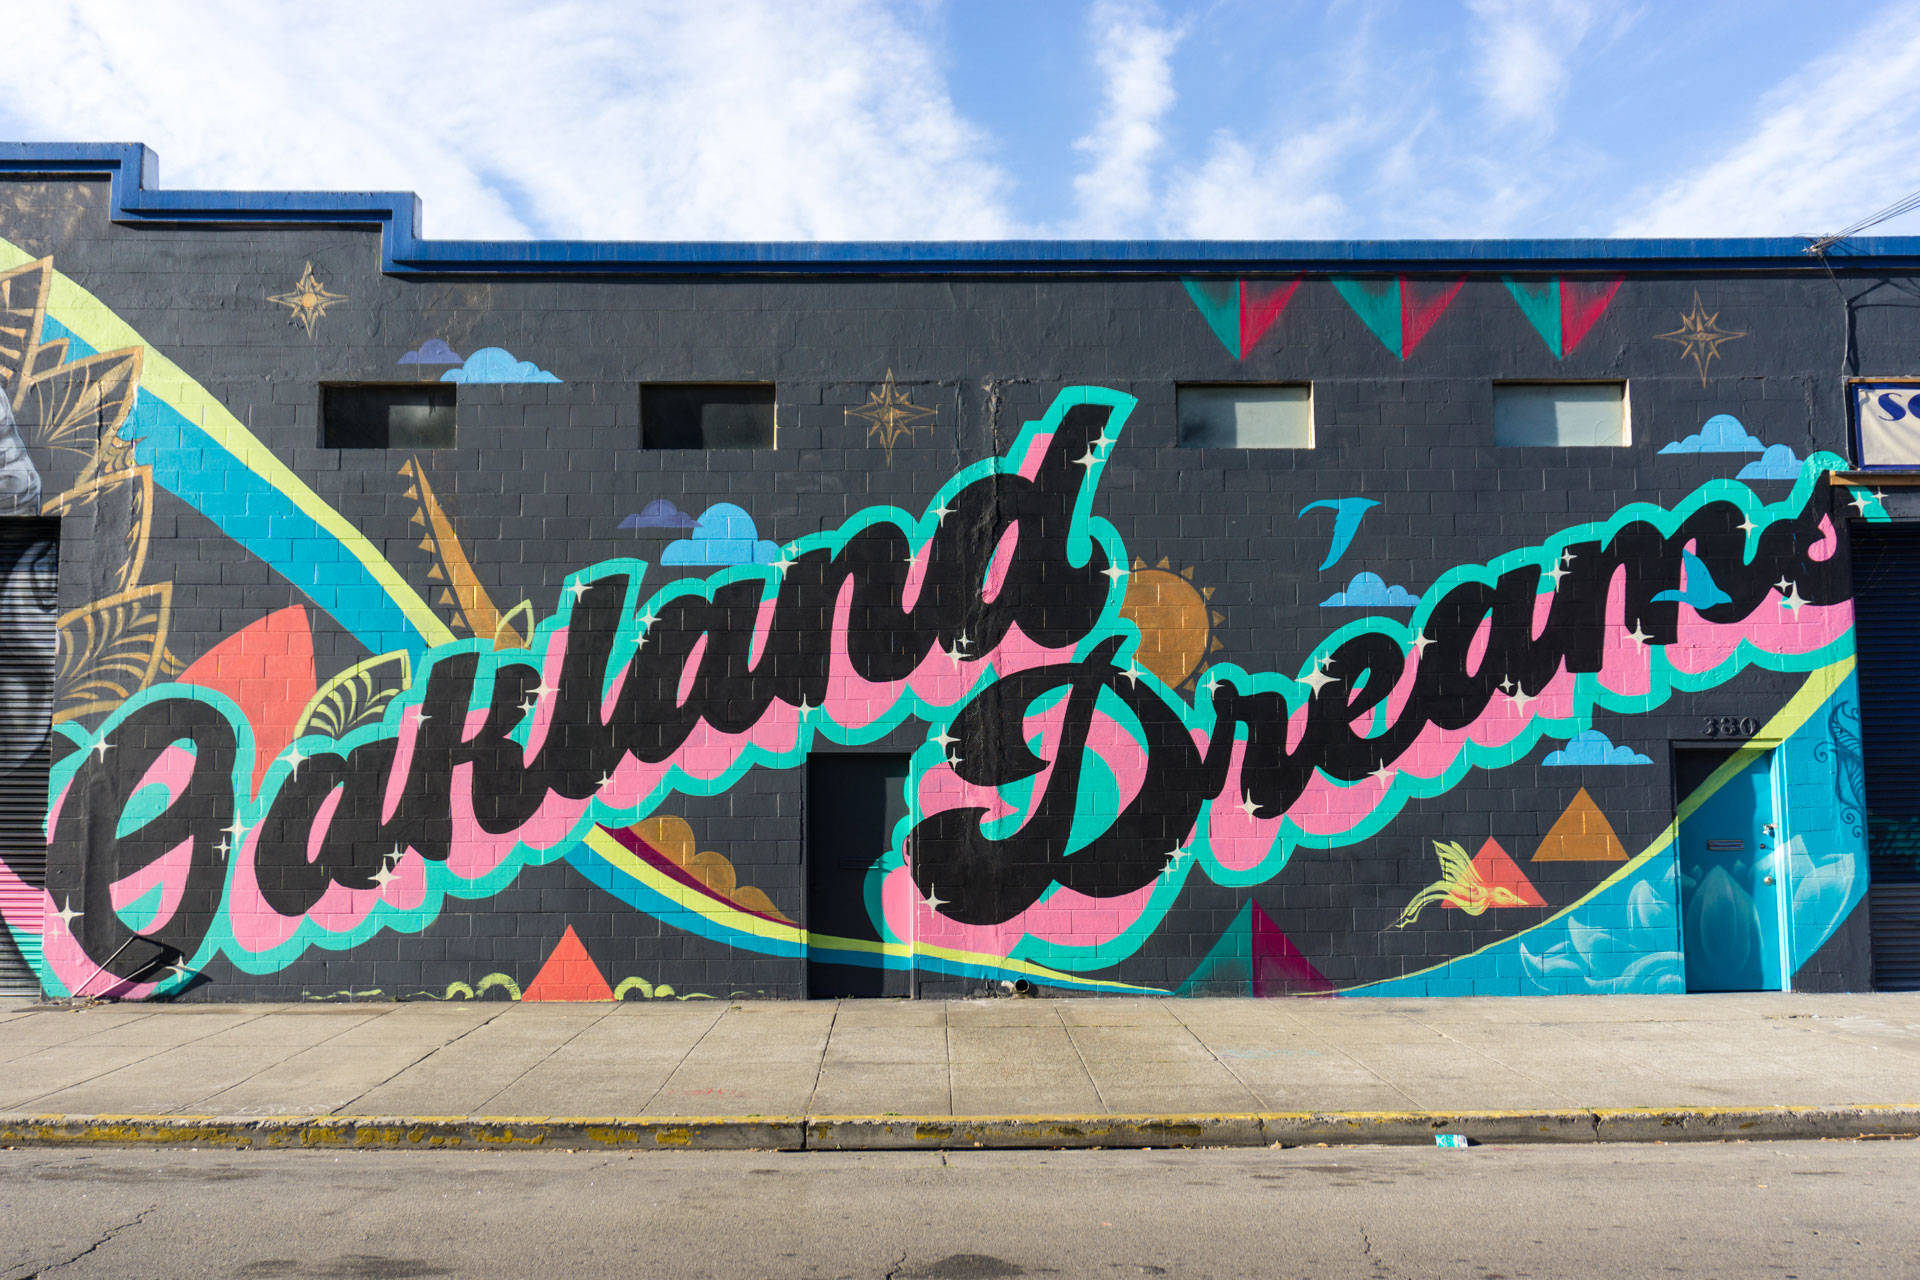 Oakland Dreams mural by Trust Your Struggle Collective as part of Oakland Mural Festival 2018. Lina Blanco / KQED